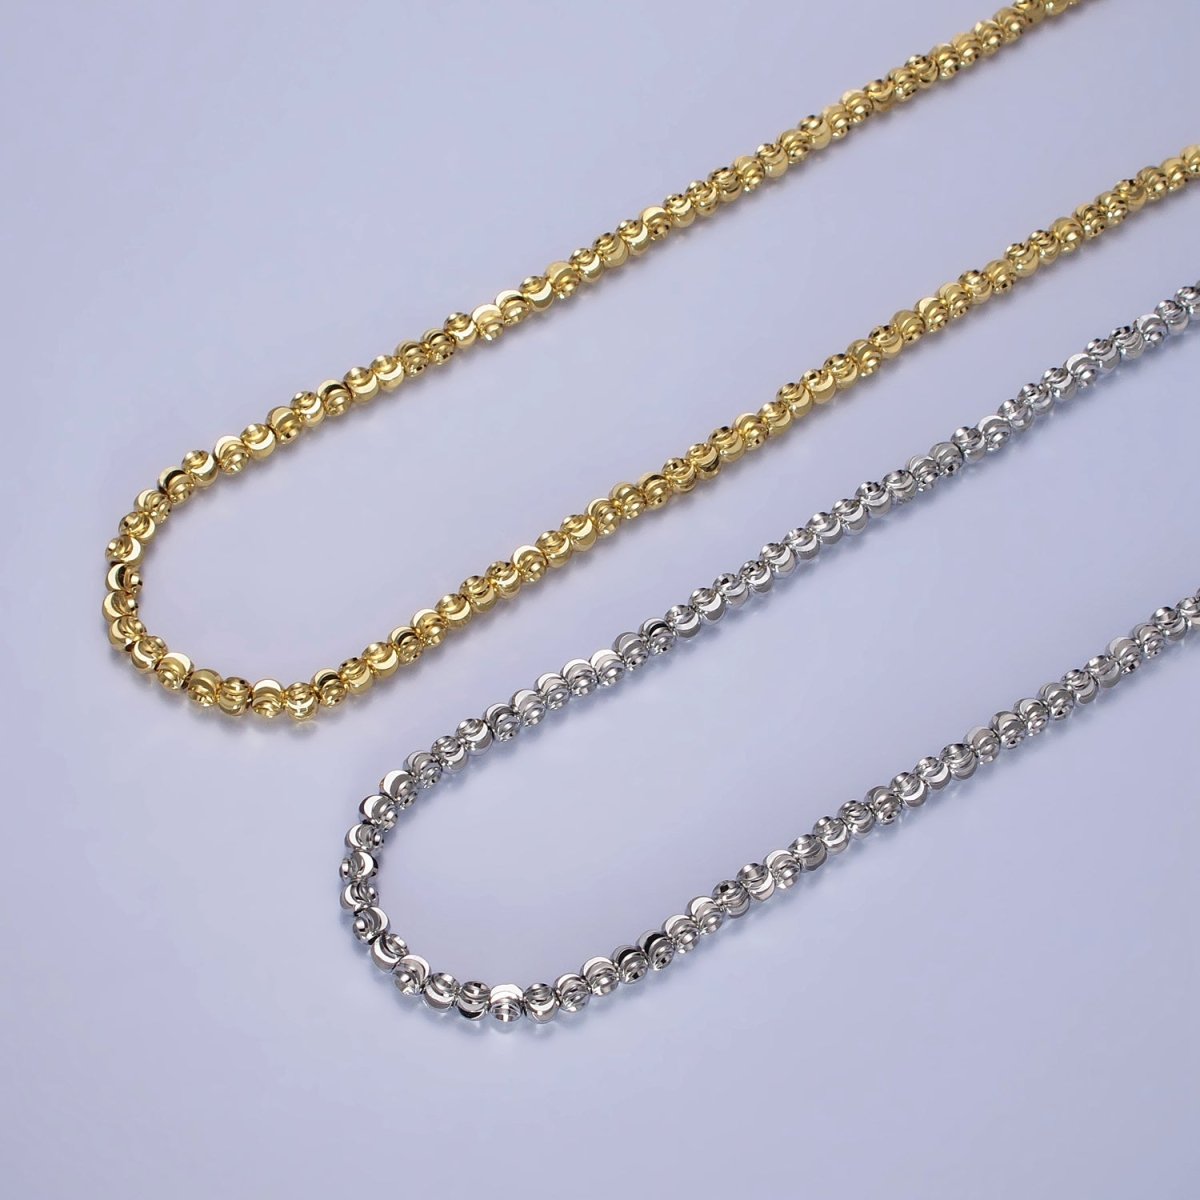 17.5 Inch Gold, Silver 3.5mm, 2.5mm Sparkling Moon Cut Ball Bead Chain Necklace | WA-1568 - WA-1571 Clearance Pricing - DLUXCA